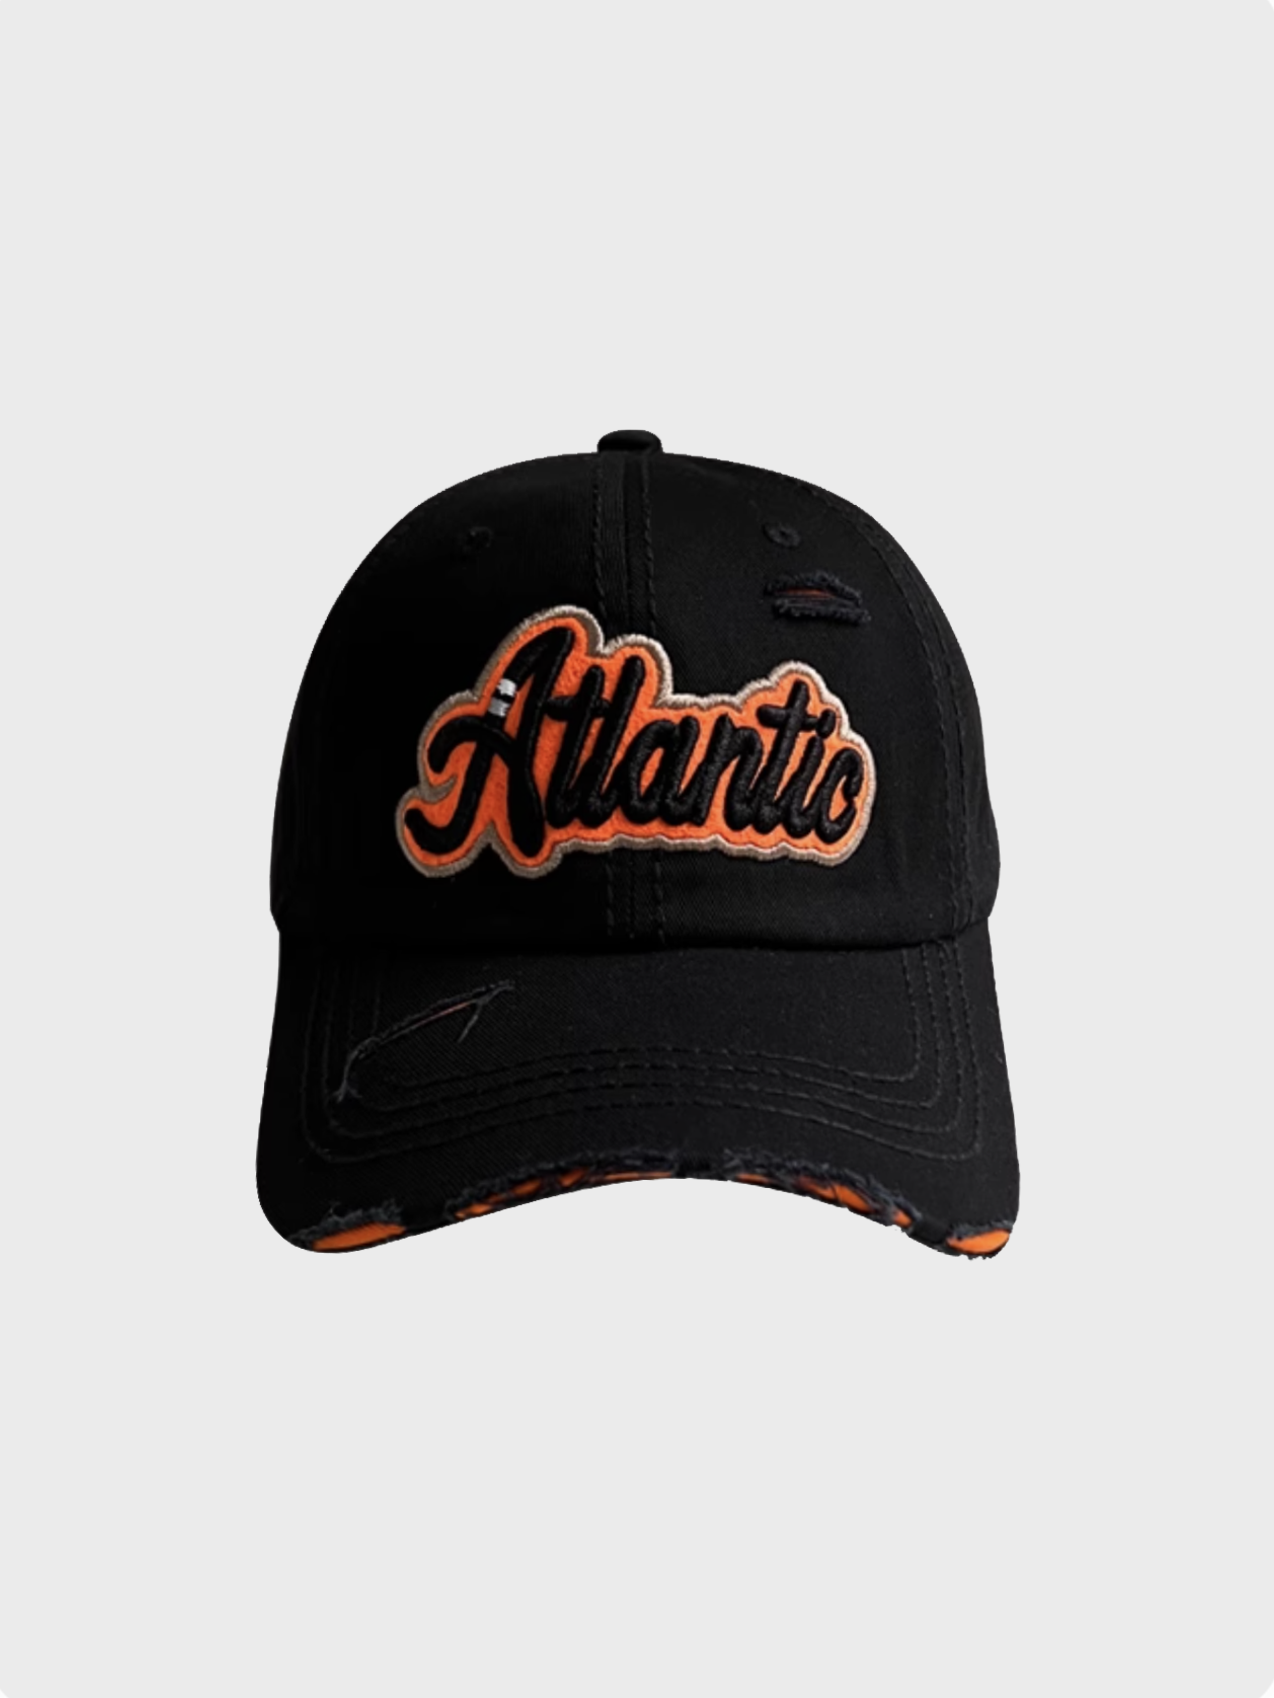 Baseball Text Letters Hat